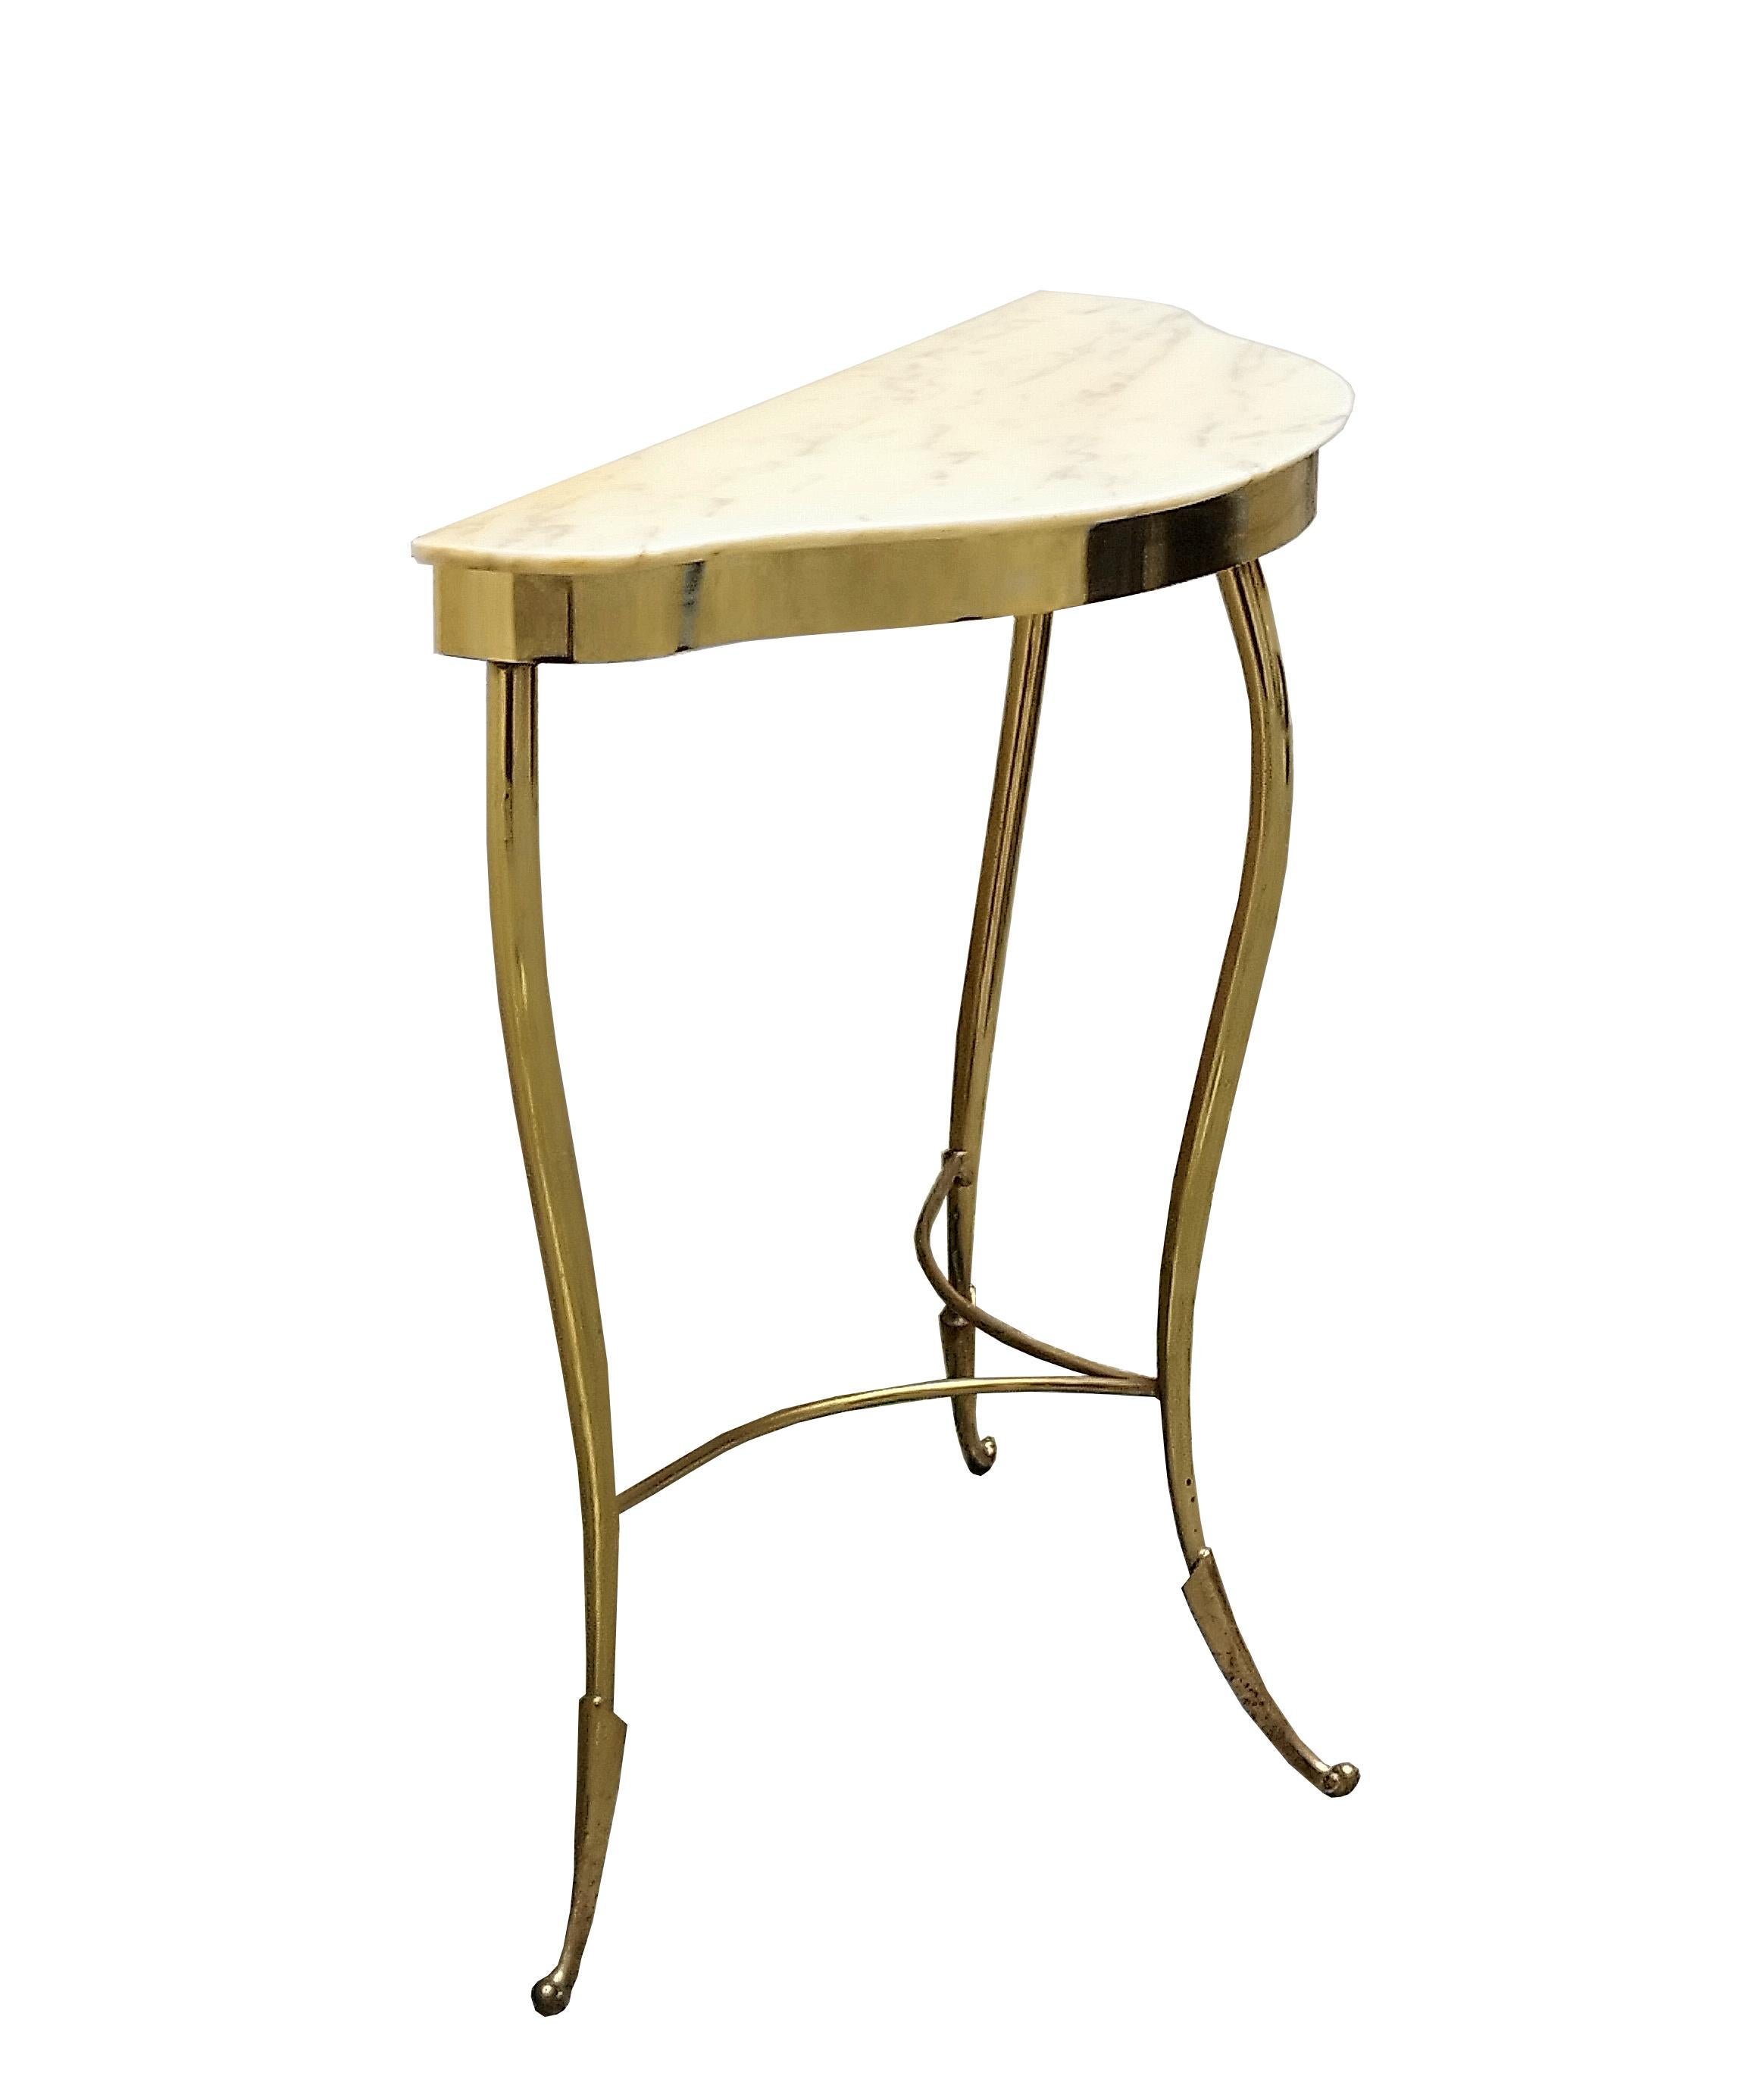 Italian console table with a crescent-shaped design, dating from the important mid-century modern design period of the 1950s. This piece is exquisitely crafted with its triad of tapered brass legs and marble top. 
